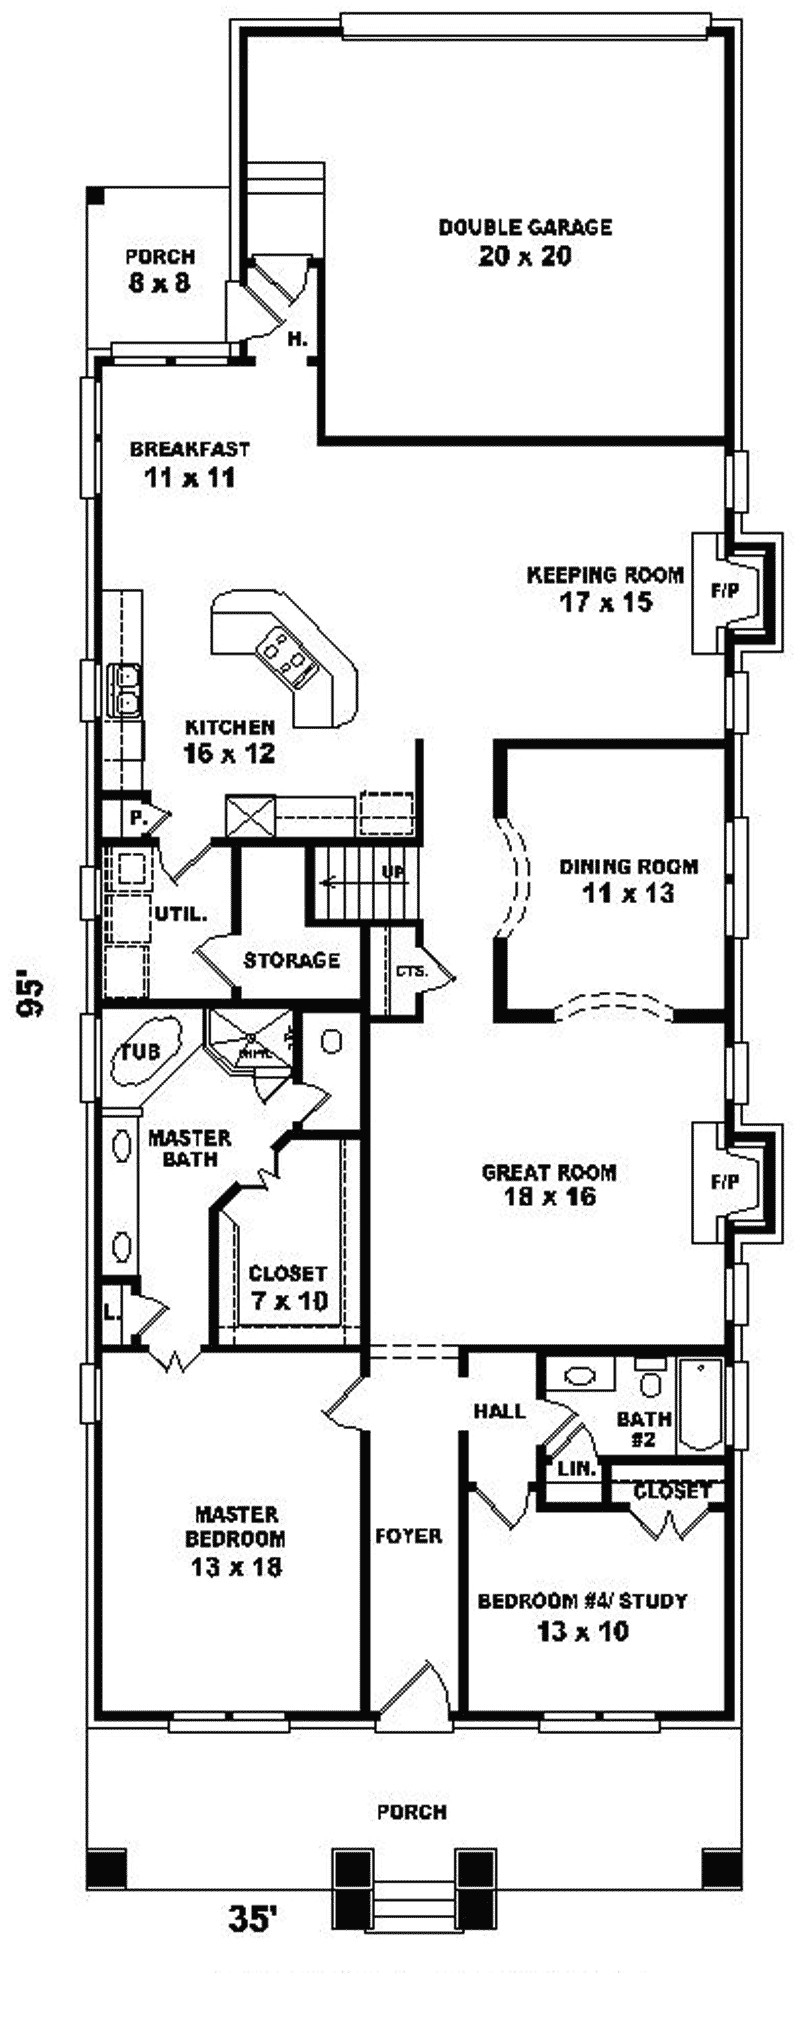 house plans for narrow lot with garage in back